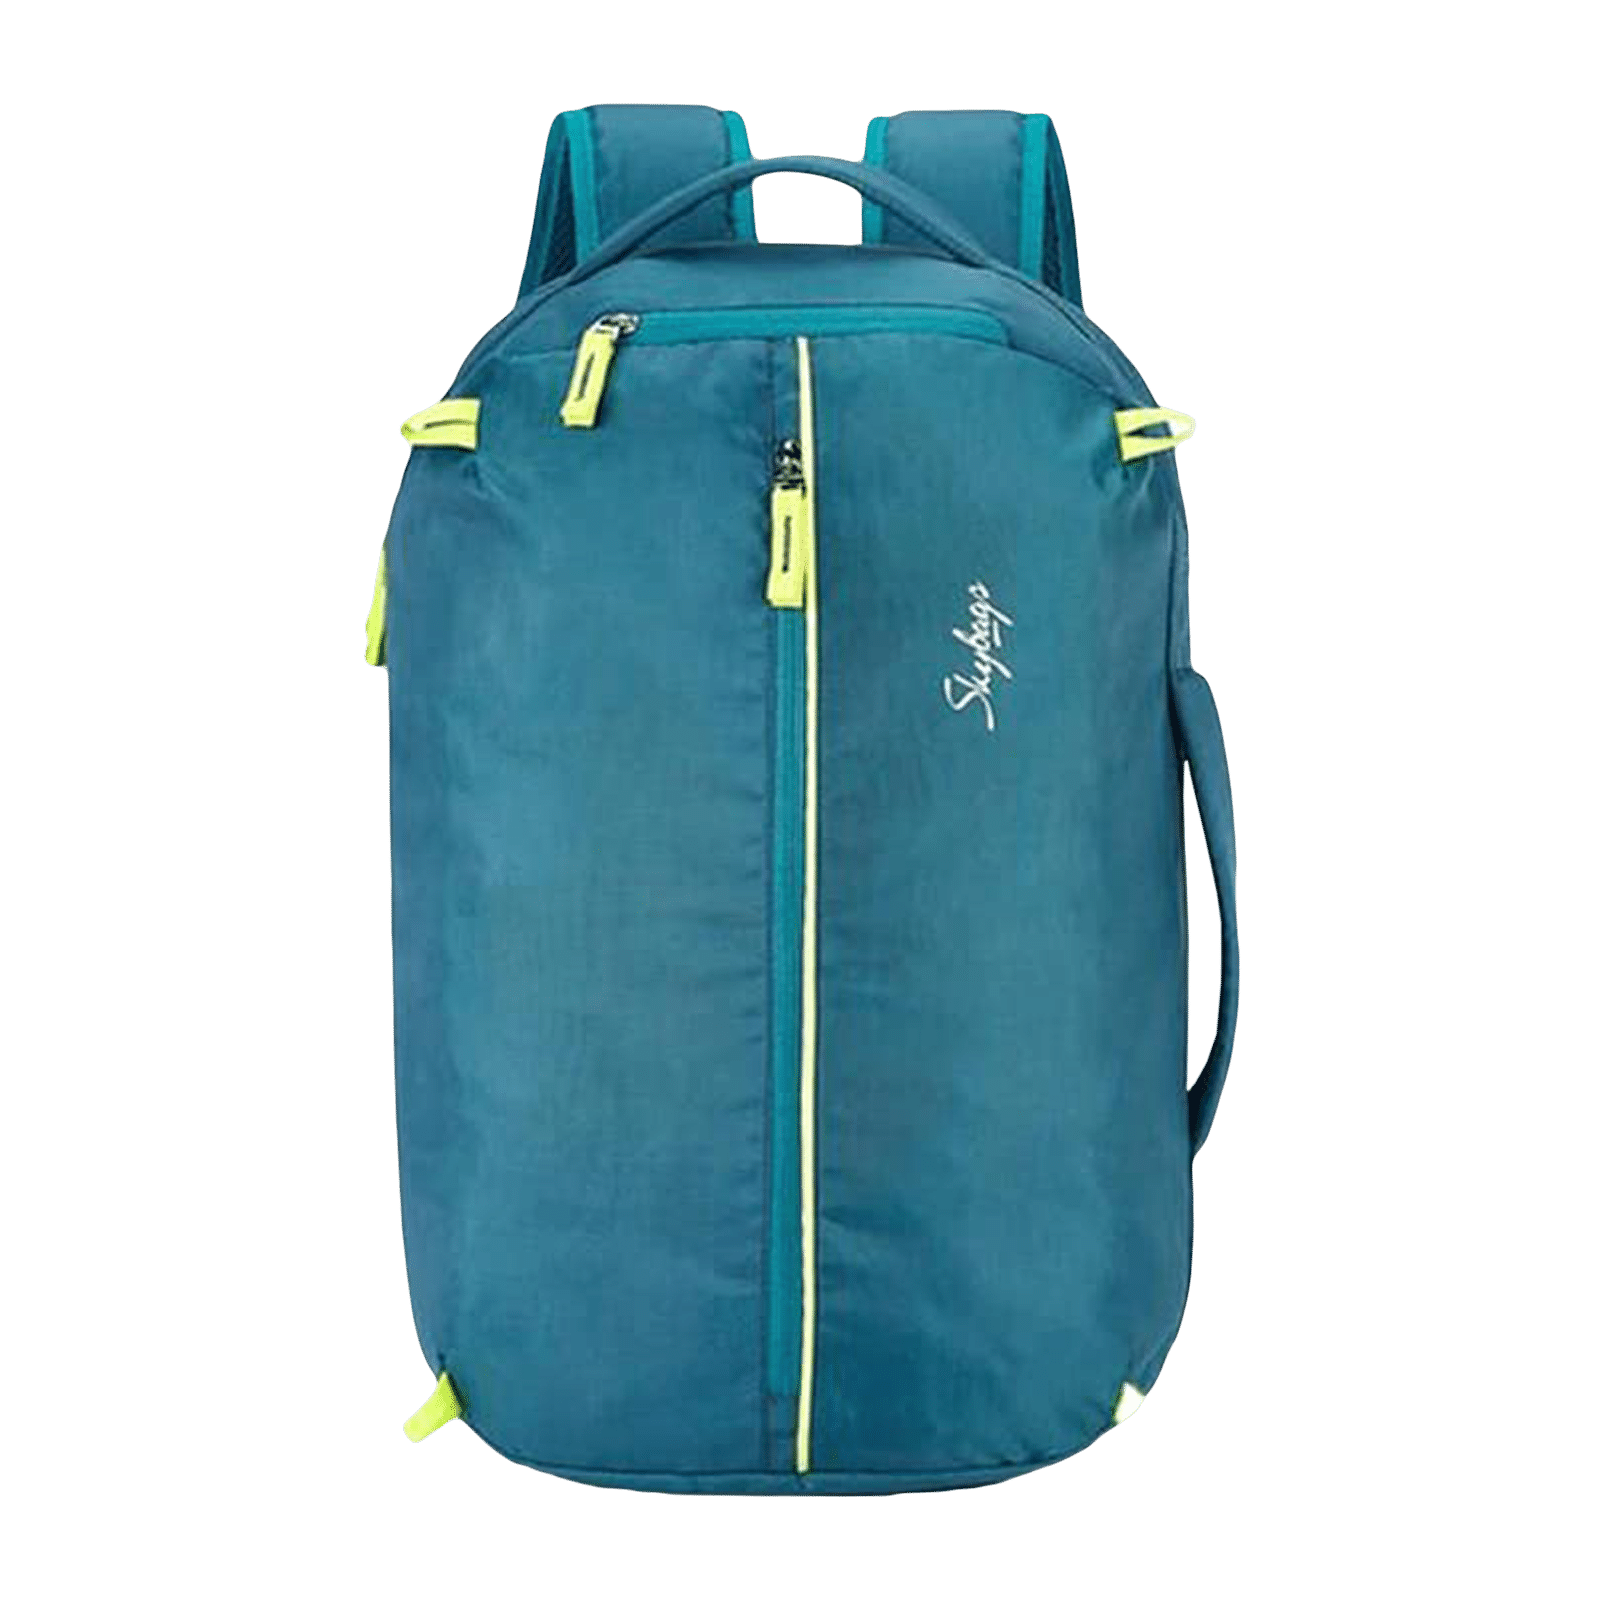 Skybags Valor Pro 02 